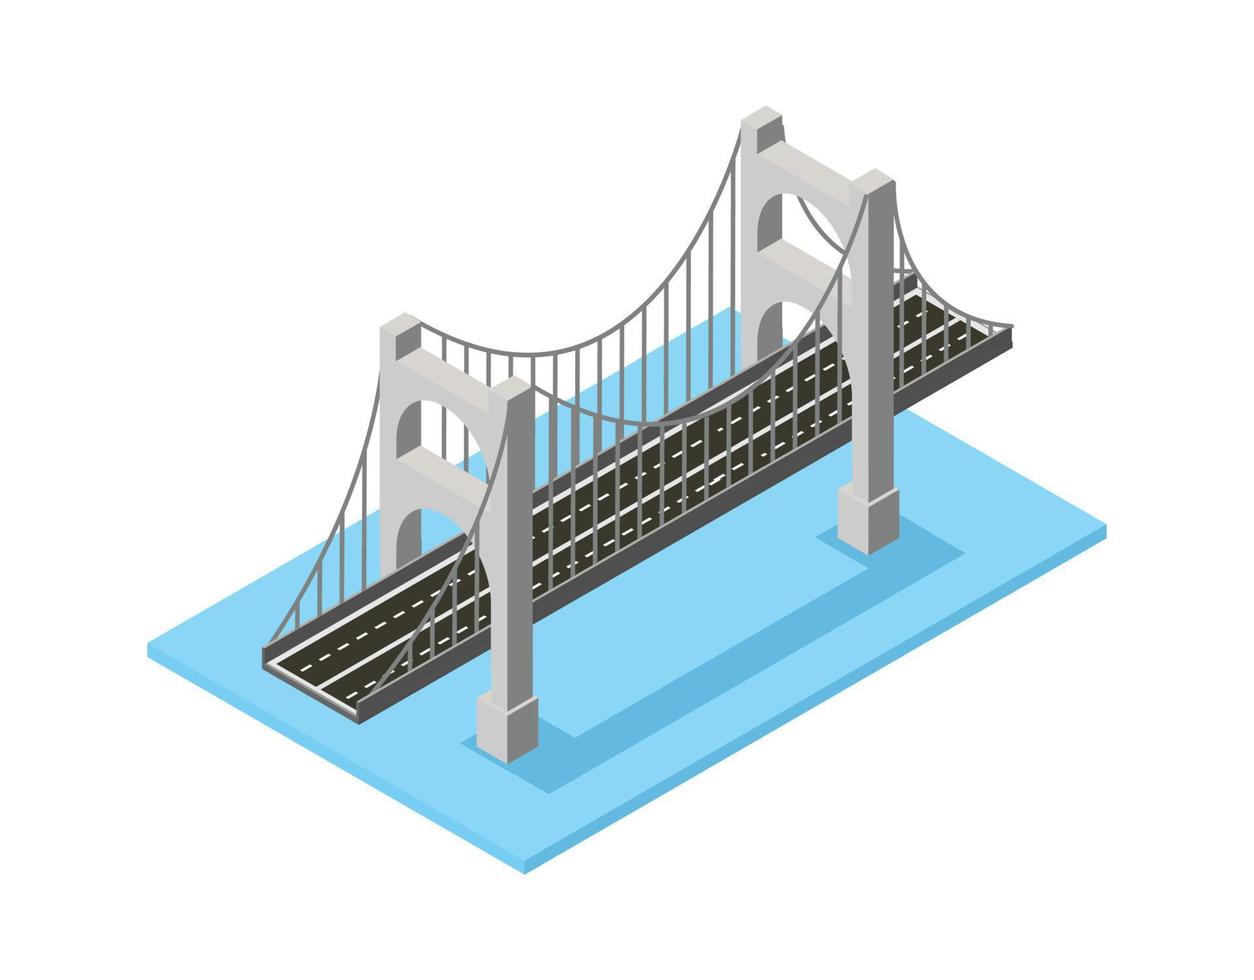 The bridge skyway of urban infrastructure is isometric for games, applications of inspiration and creativity. Suitable for Diagrams, Infographics, And Other Graphic assets vector